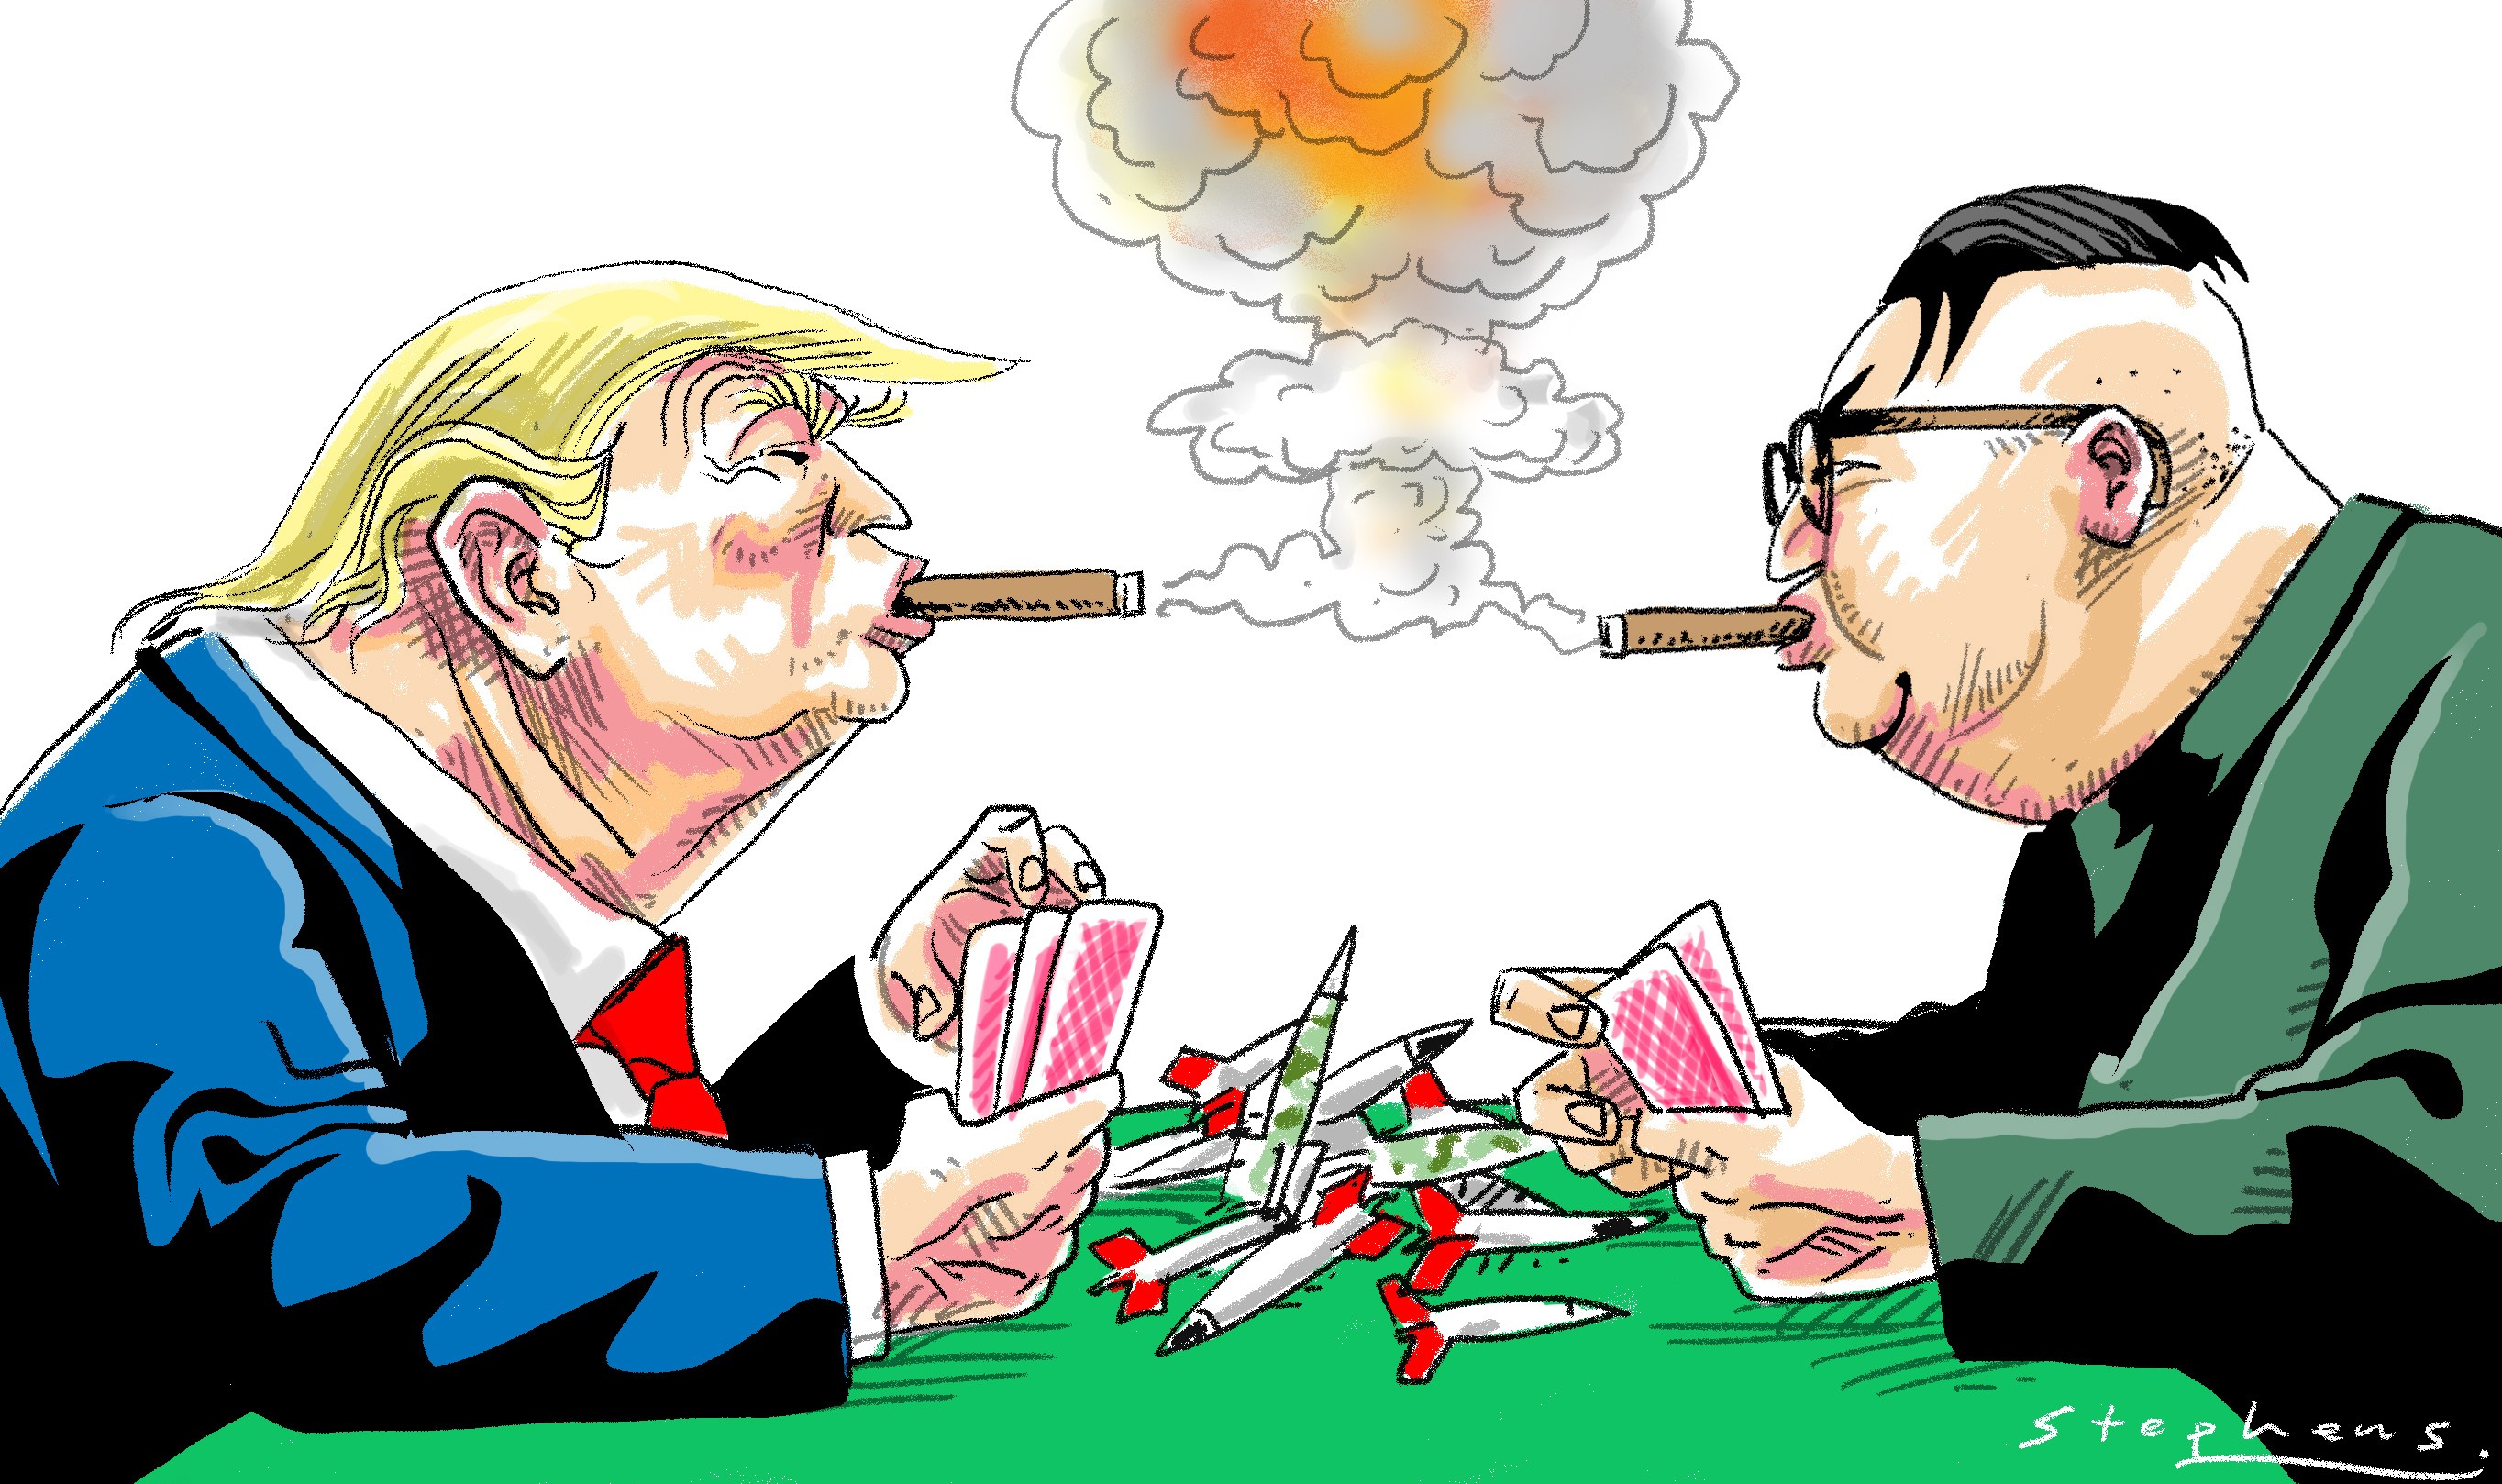 Nuclear diplomacy is not a casino game or akin to bluffing in property transactions. It is a complex contest of strategy, never one of mere chance. Illustration: Craig Stephens